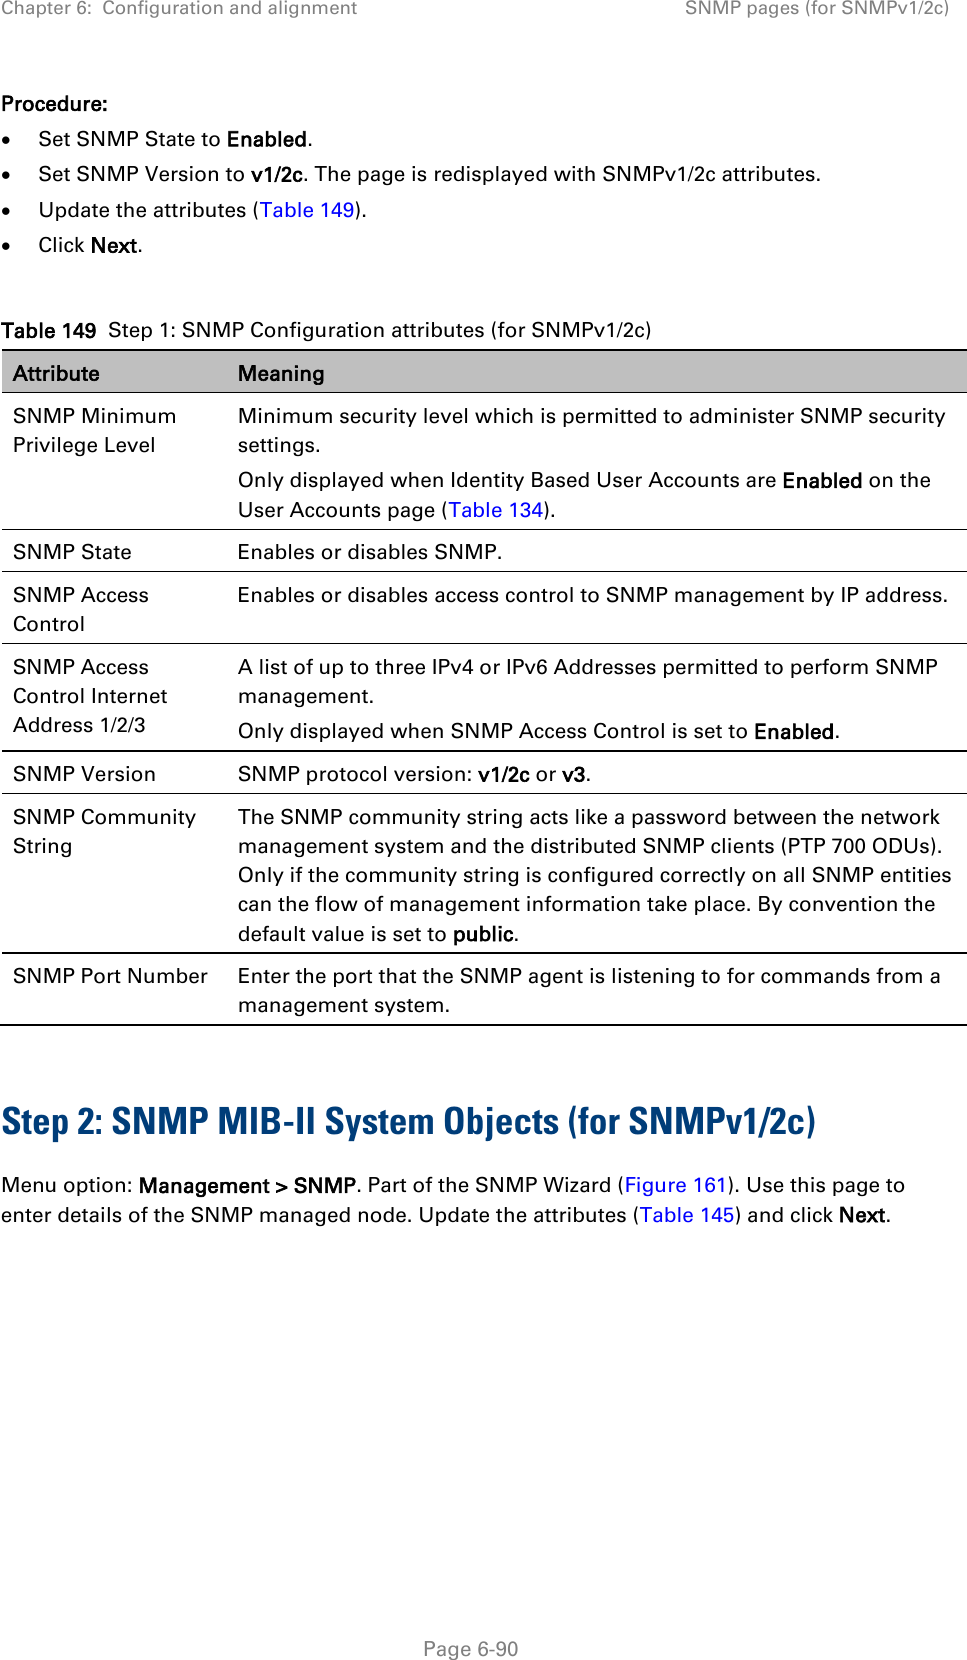 Chapter 6:  Configuration and alignment SNMP pages (for SNMPv1/2c)  Procedure: • Set SNMP State to Enabled. • Set SNMP Version to v1/2c. The page is redisplayed with SNMPv1/2c attributes. • Update the attributes (Table 149). • Click Next.  Table 149  Step 1: SNMP Configuration attributes (for SNMPv1/2c) Attribute Meaning SNMP Minimum Privilege Level Minimum security level which is permitted to administer SNMP security settings. Only displayed when Identity Based User Accounts are Enabled on the User Accounts page (Table 134). SNMP State Enables or disables SNMP. SNMP Access Control Enables or disables access control to SNMP management by IP address. SNMP Access Control Internet Address 1/2/3 A list of up to three IPv4 or IPv6 Addresses permitted to perform SNMP management. Only displayed when SNMP Access Control is set to Enabled. SNMP Version SNMP protocol version: v1/2c or v3. SNMP Community String The SNMP community string acts like a password between the network management system and the distributed SNMP clients (PTP 700 ODUs). Only if the community string is configured correctly on all SNMP entities can the flow of management information take place. By convention the default value is set to public. SNMP Port Number Enter the port that the SNMP agent is listening to for commands from a management system.  Step 2: SNMP MIB-II System Objects (for SNMPv1/2c) Menu option: Management &gt; SNMP. Part of the SNMP Wizard (Figure 161). Use this page to enter details of the SNMP managed node. Update the attributes (Table 145) and click Next.   Page 6-90 